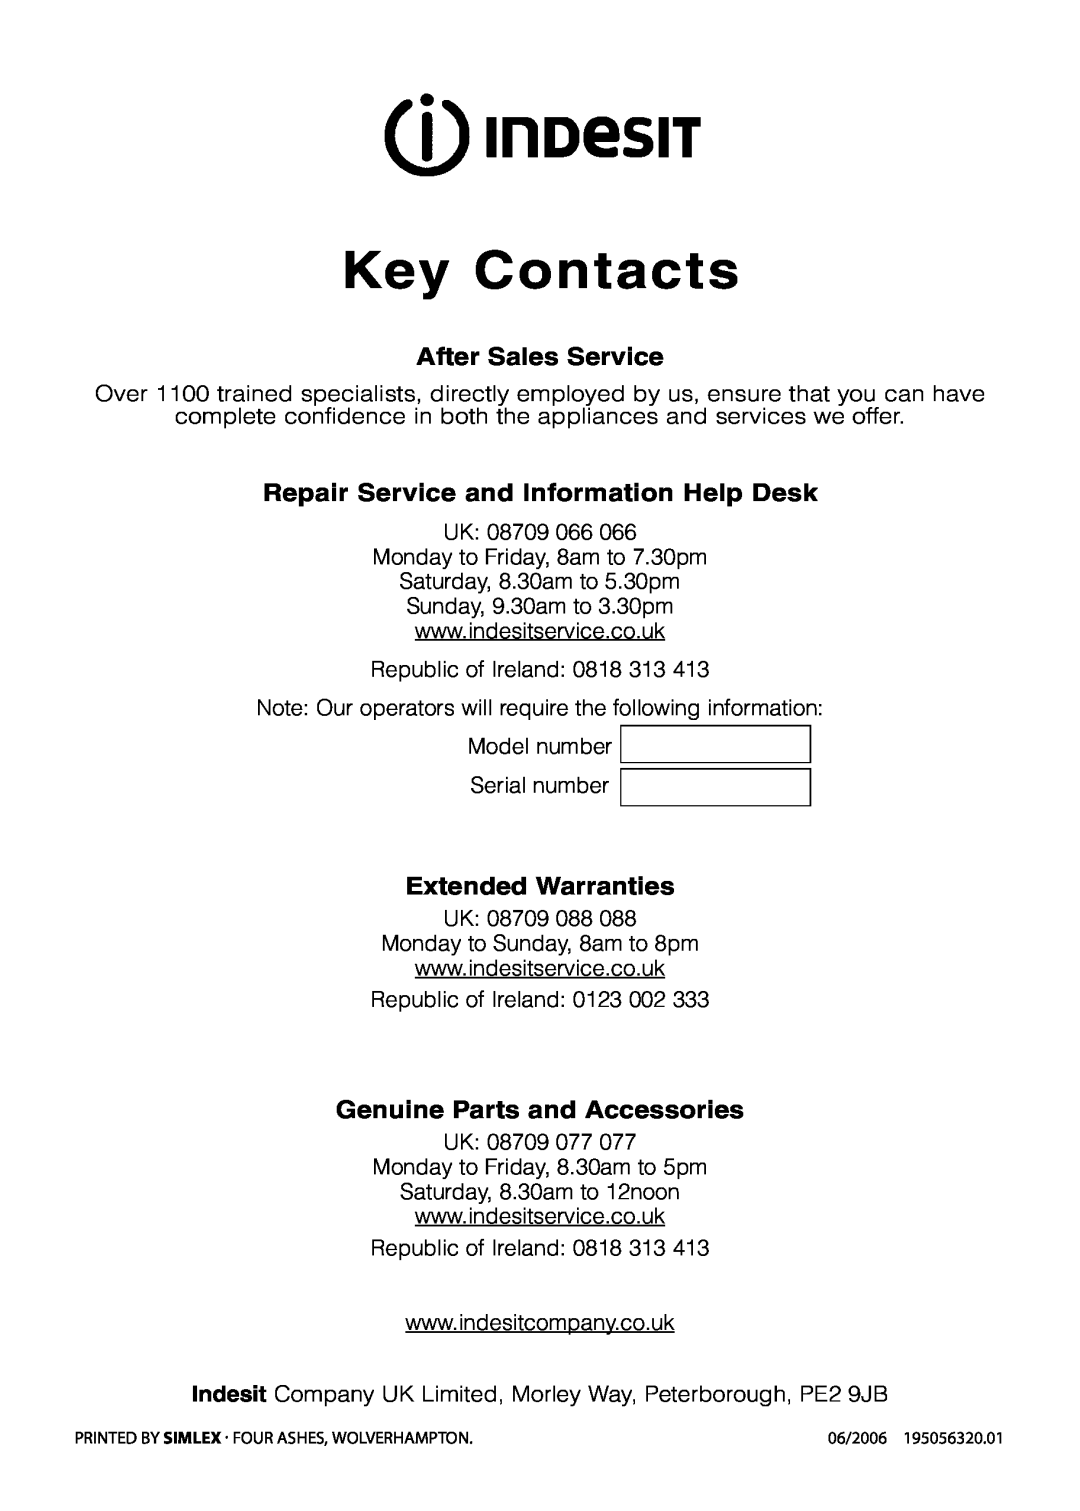 Indesit KD6G25M, KD6G25W Key Contacts, After Sales Service, Repair Service and Information Help Desk, Extended Warranties 